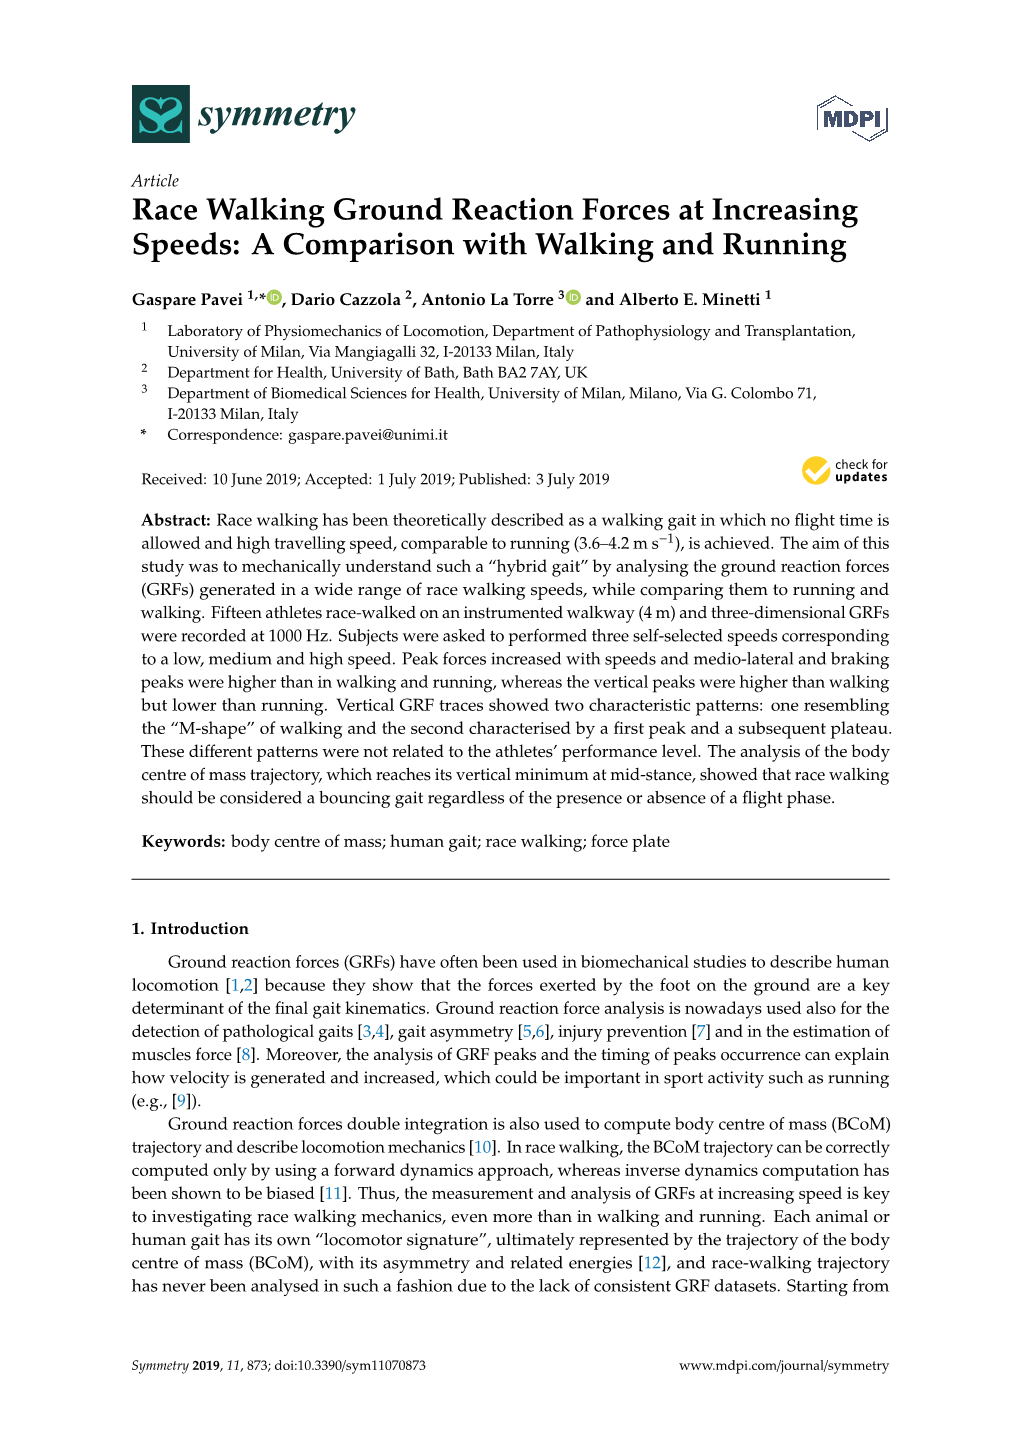 Race Walking Ground Reaction Forces at Increasing Speeds: a Comparison with Walking and Running